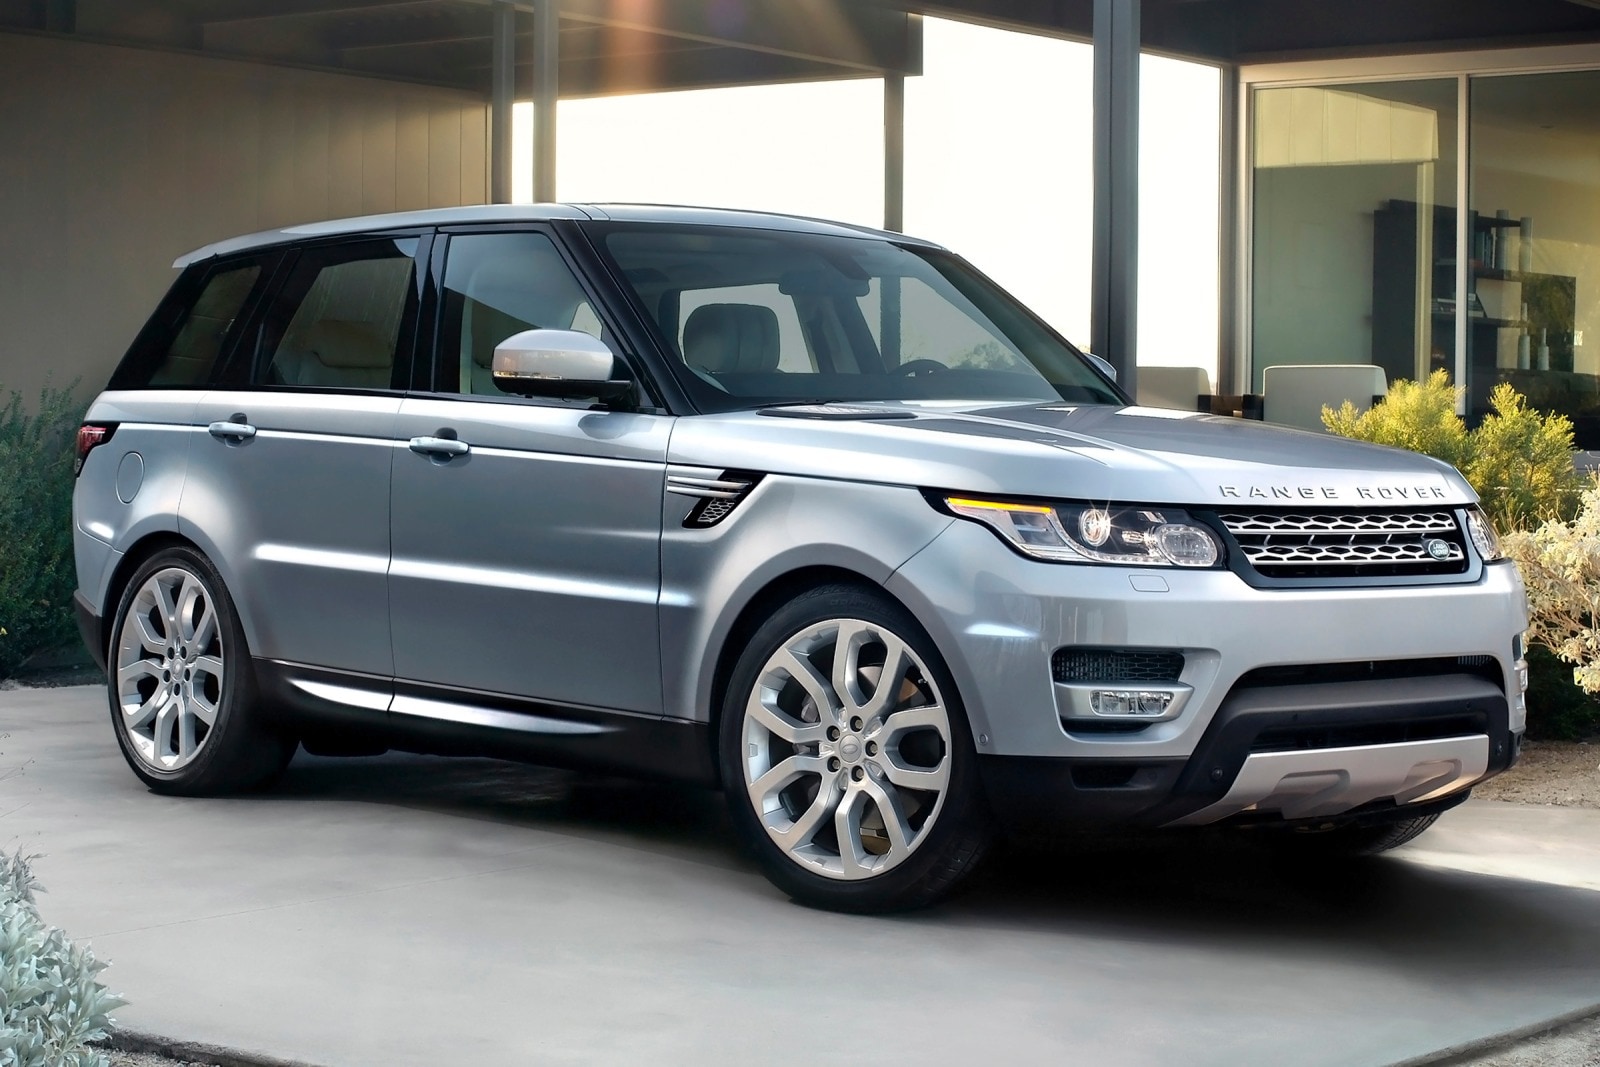 2015 Land Rover Range Rover Sport Review & Ratings | Edmunds